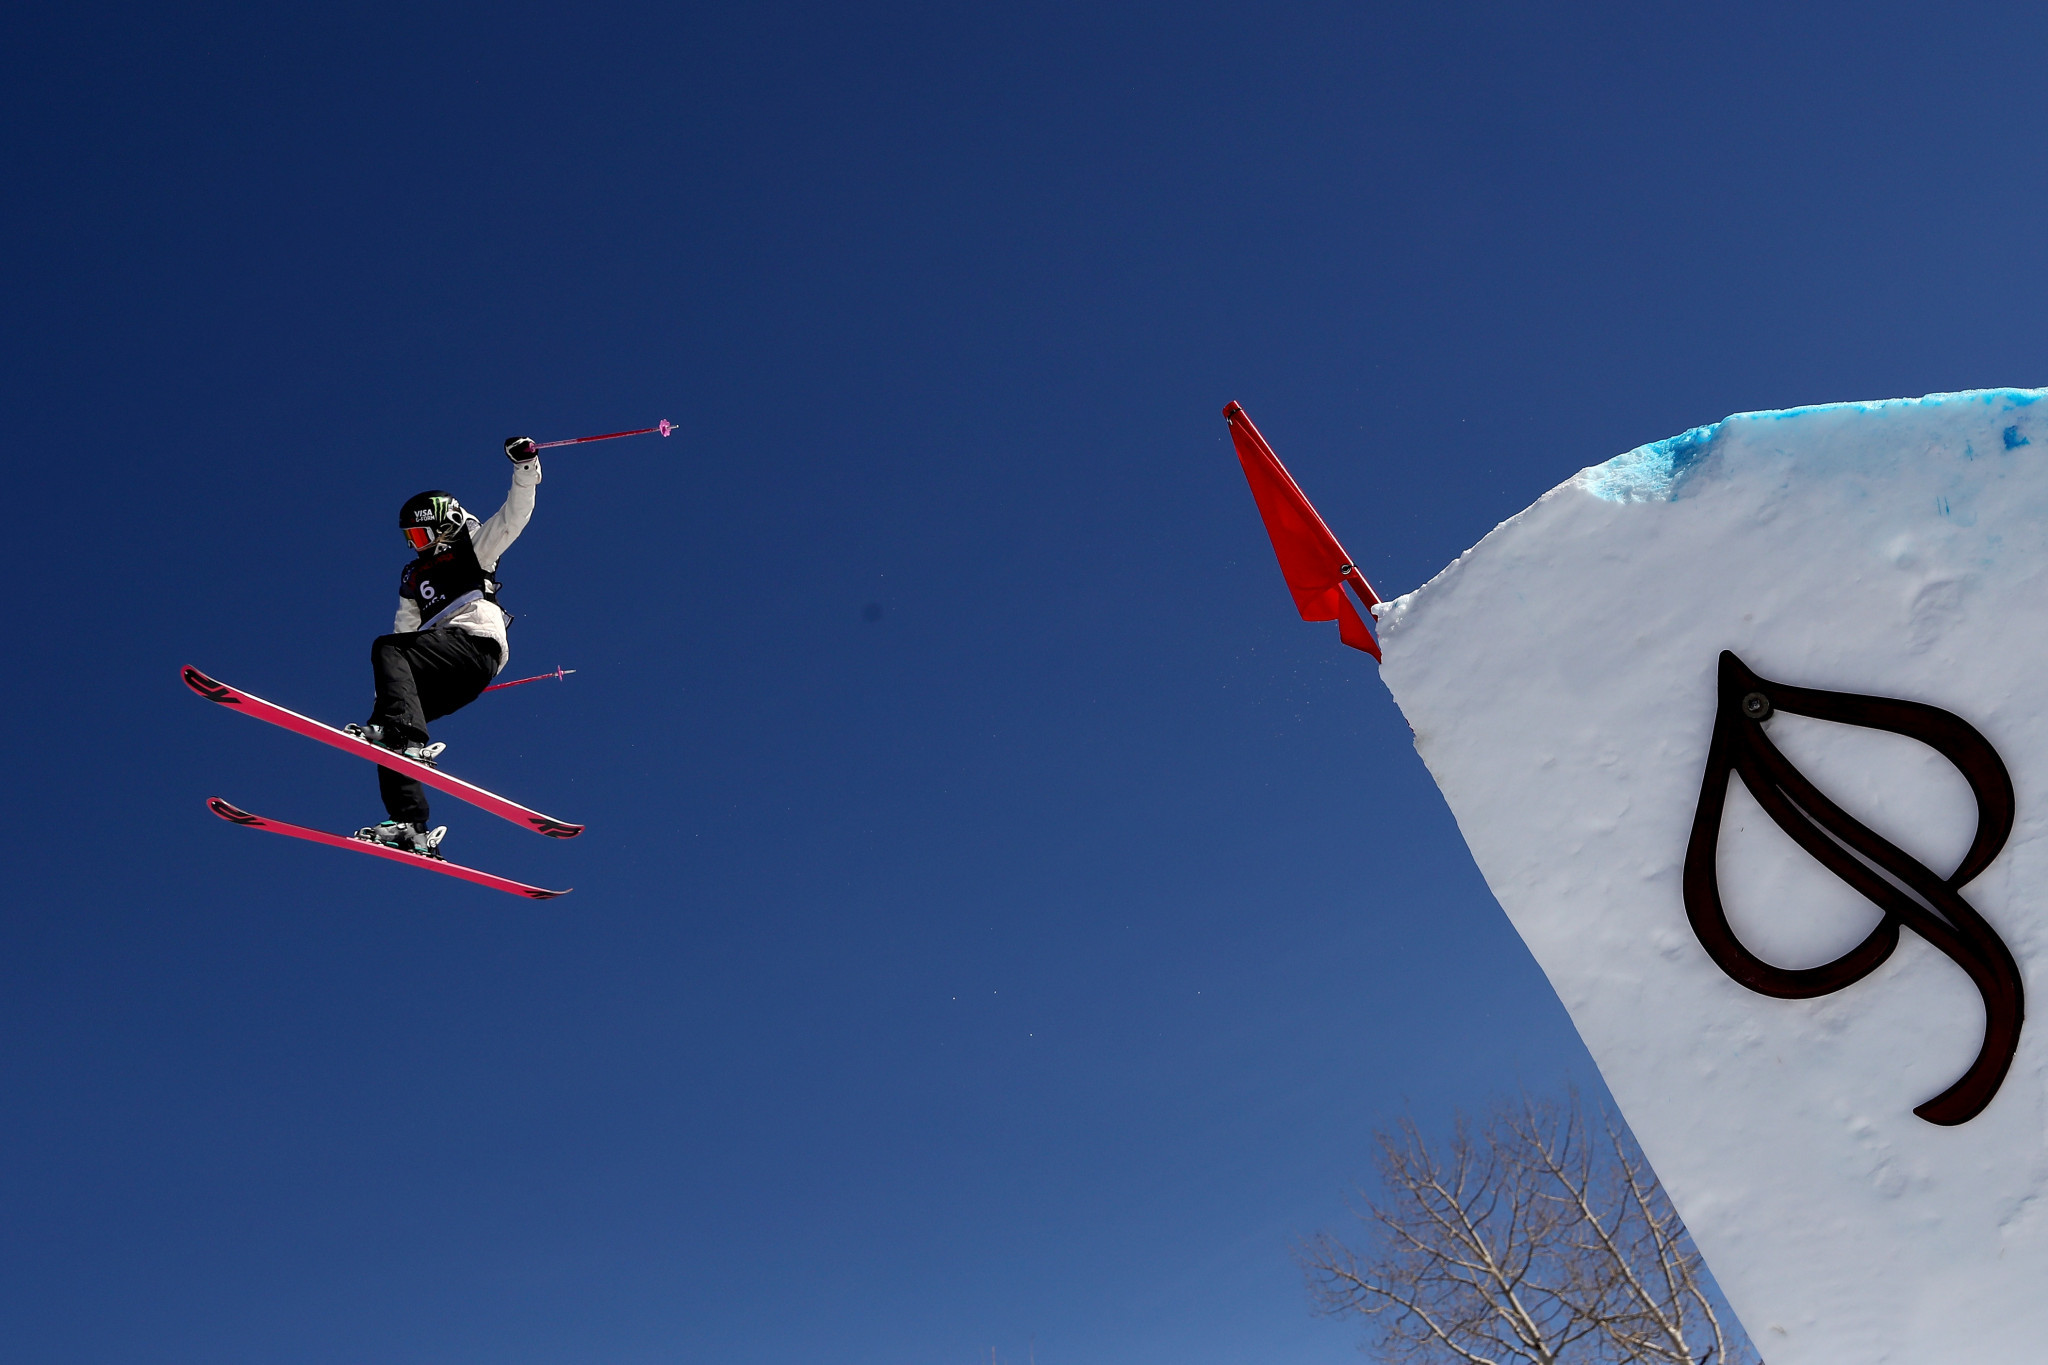 Aspen Snowmass to host 2020 and 2022 US Alpine Tech Championships